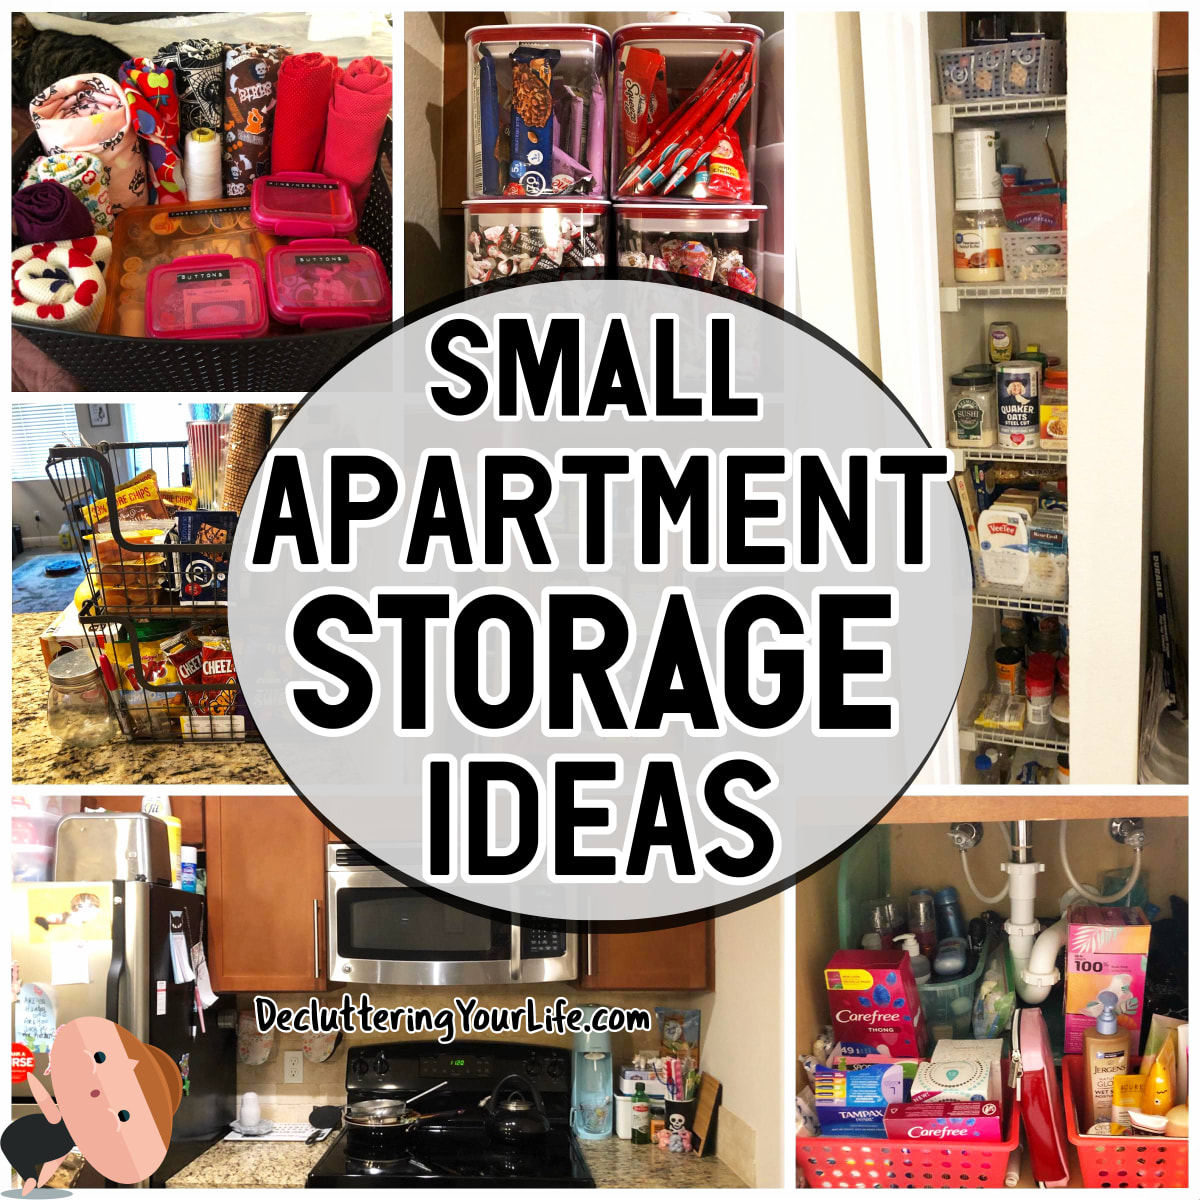 How to organize a small apartment with NO storage - 50 clever ways to organize a small apartment